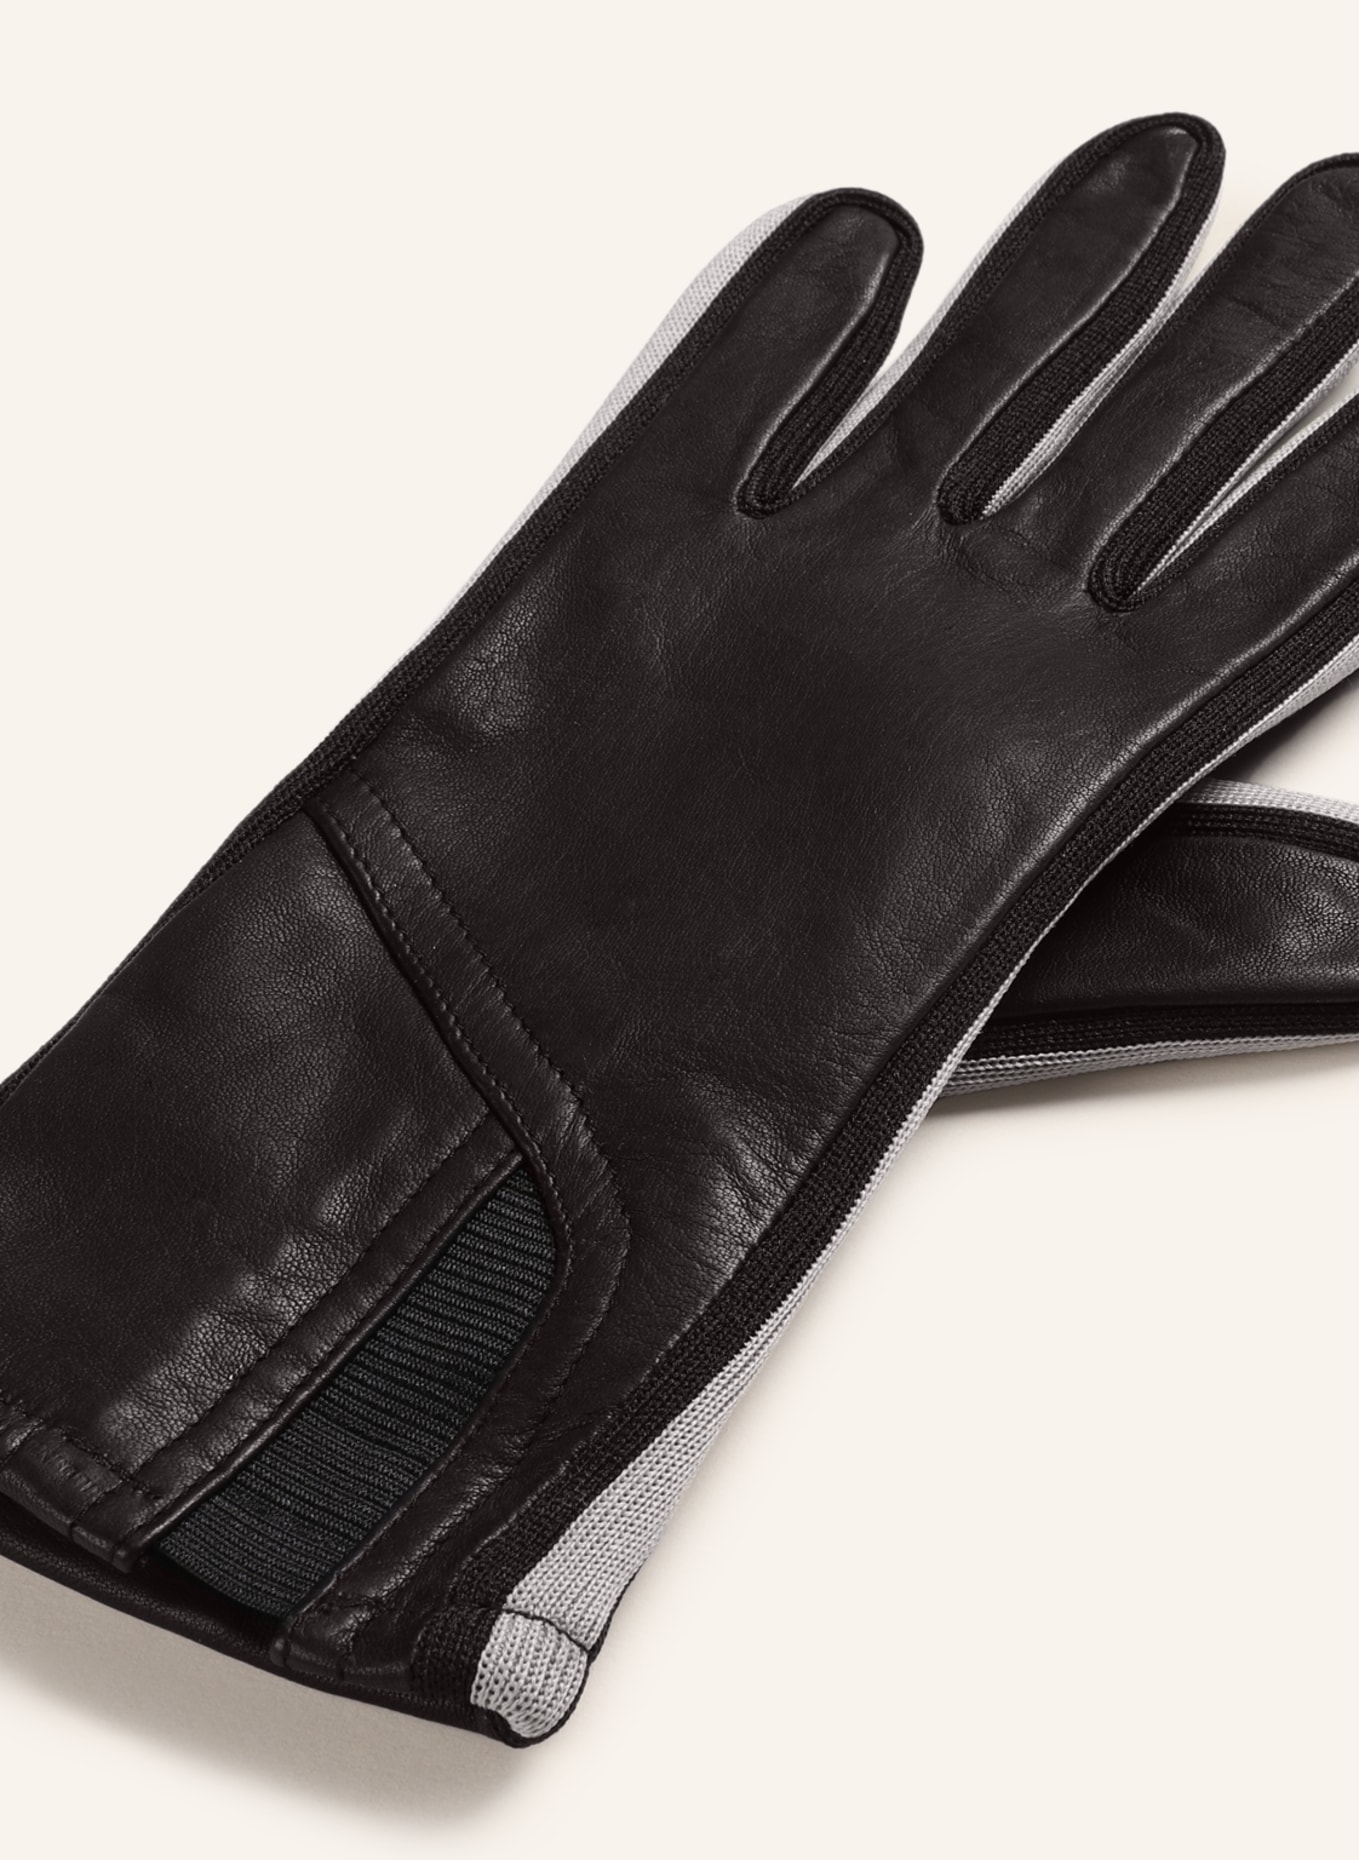 TOUCH black touchscreen with Leather gloves KESSLER in GIL function